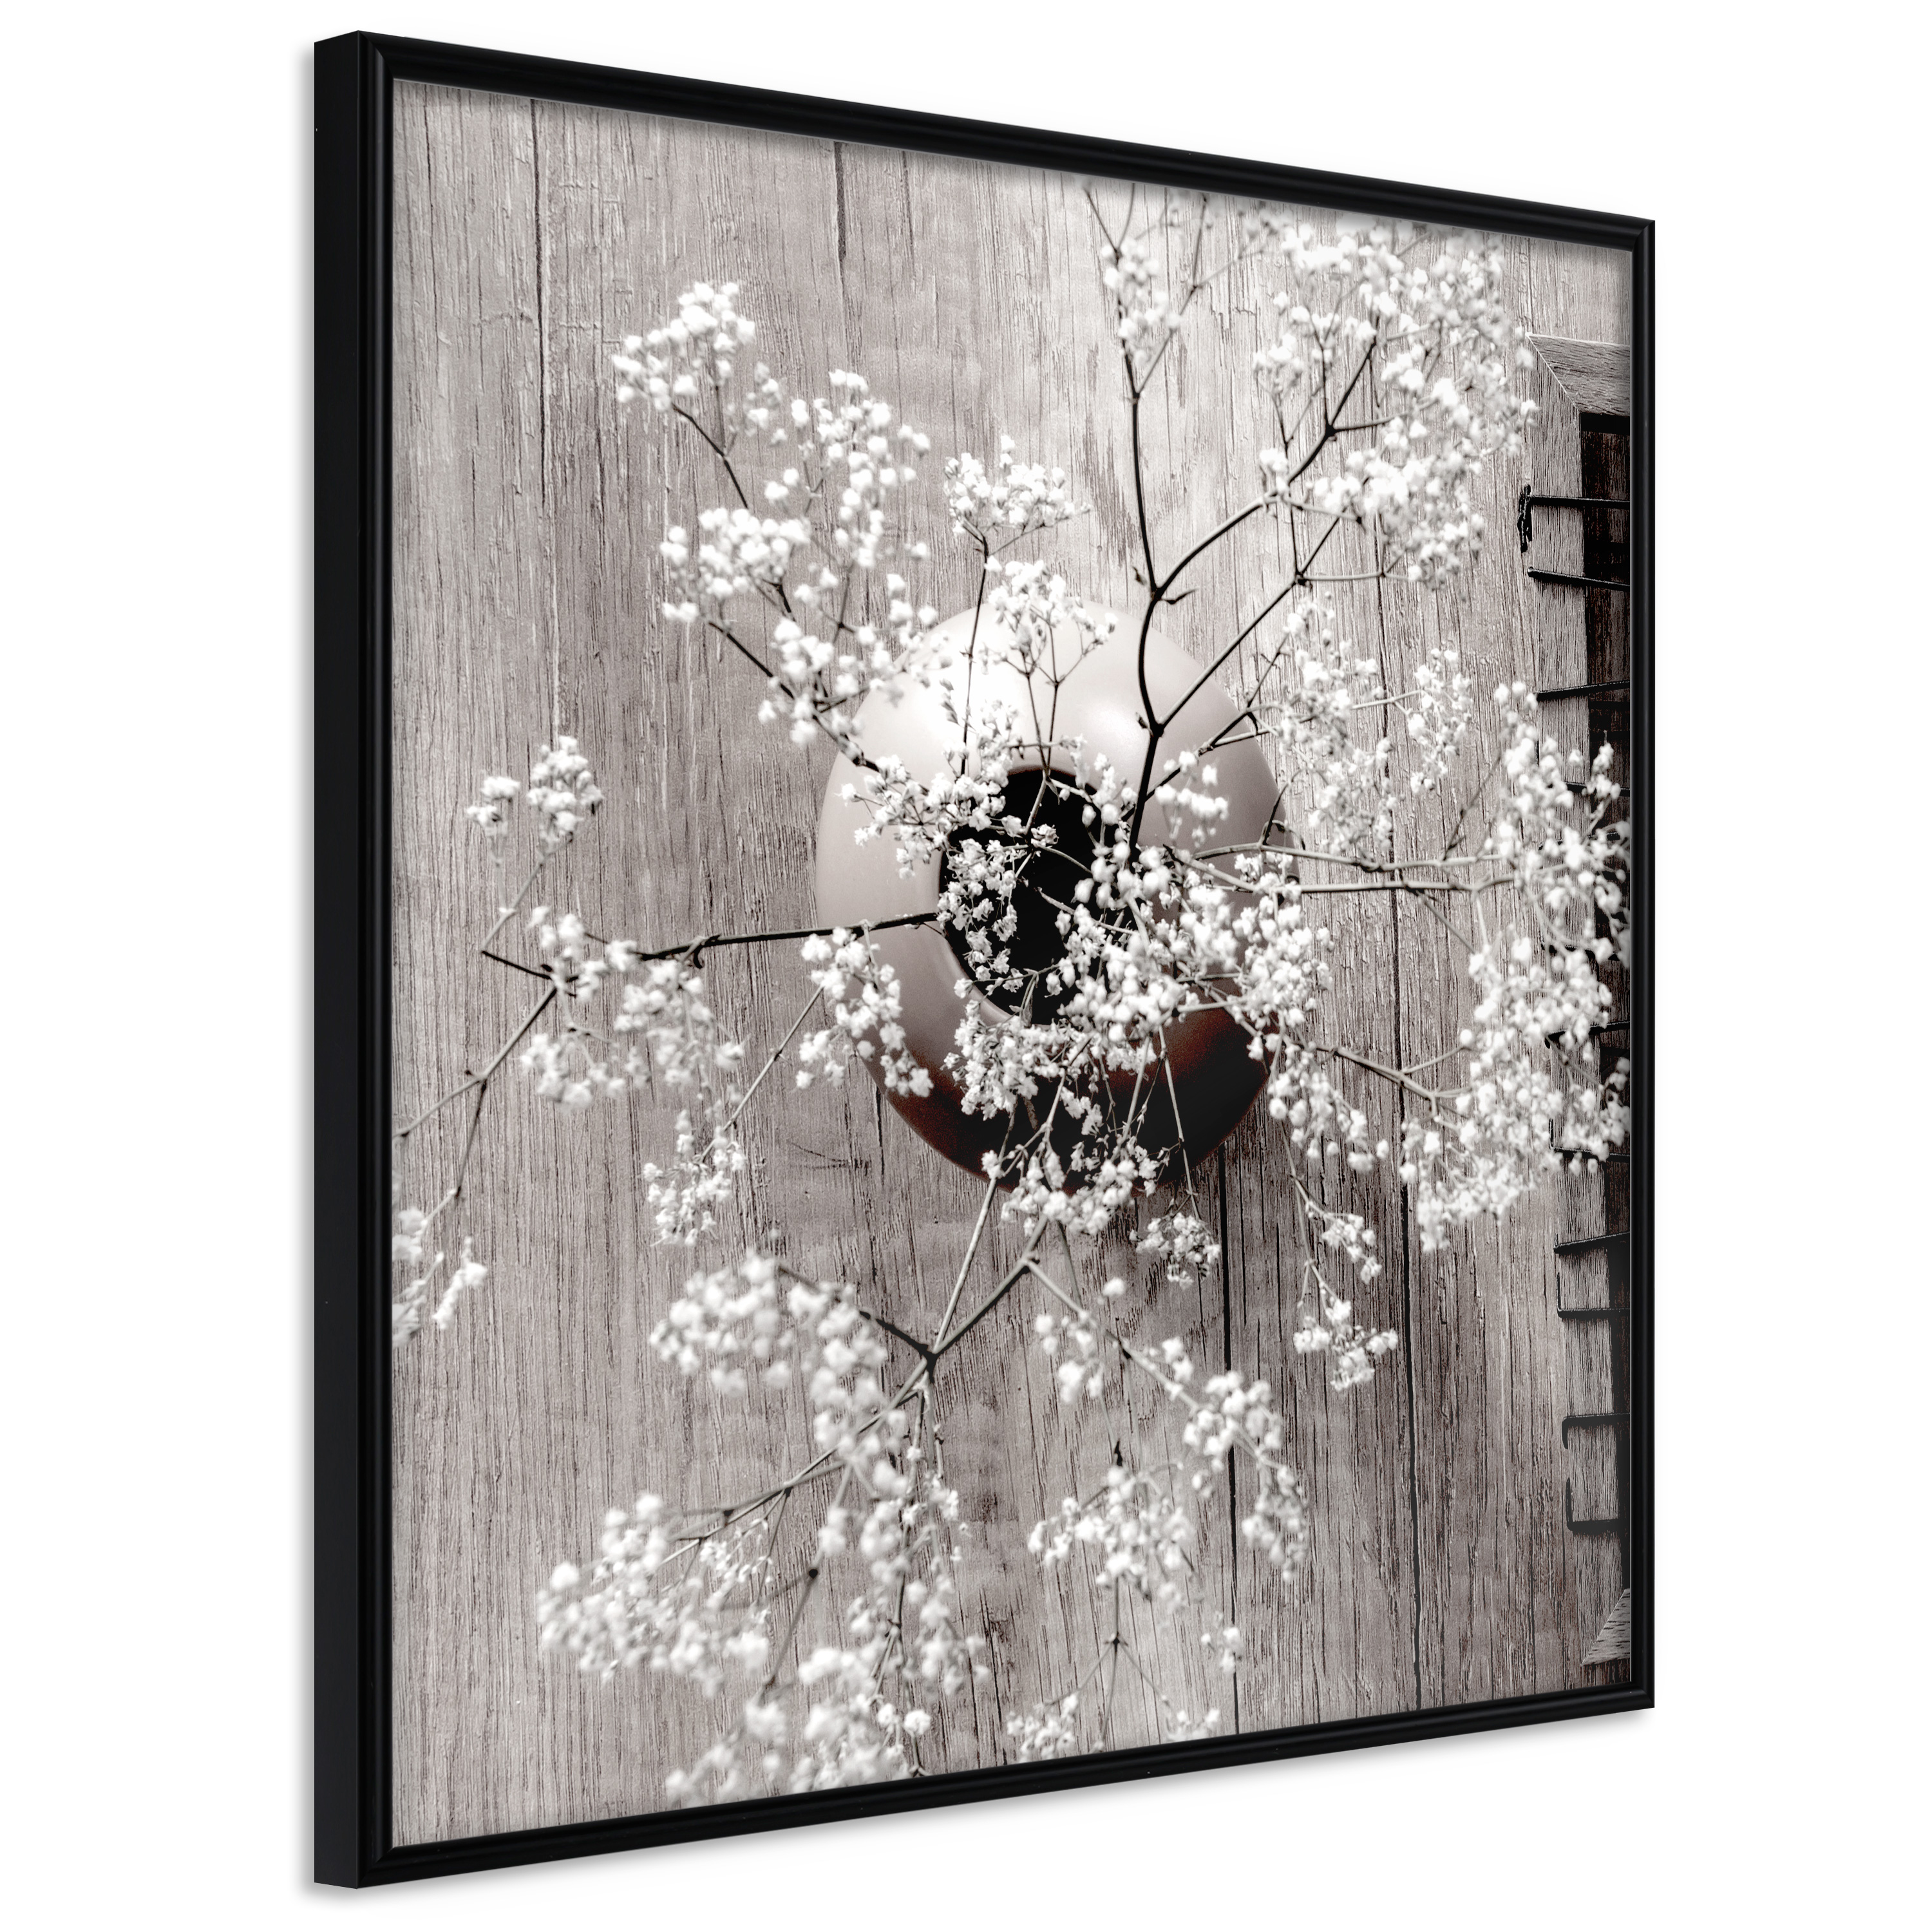 Poster - Reminiscence of Spring (Square) - 20x20